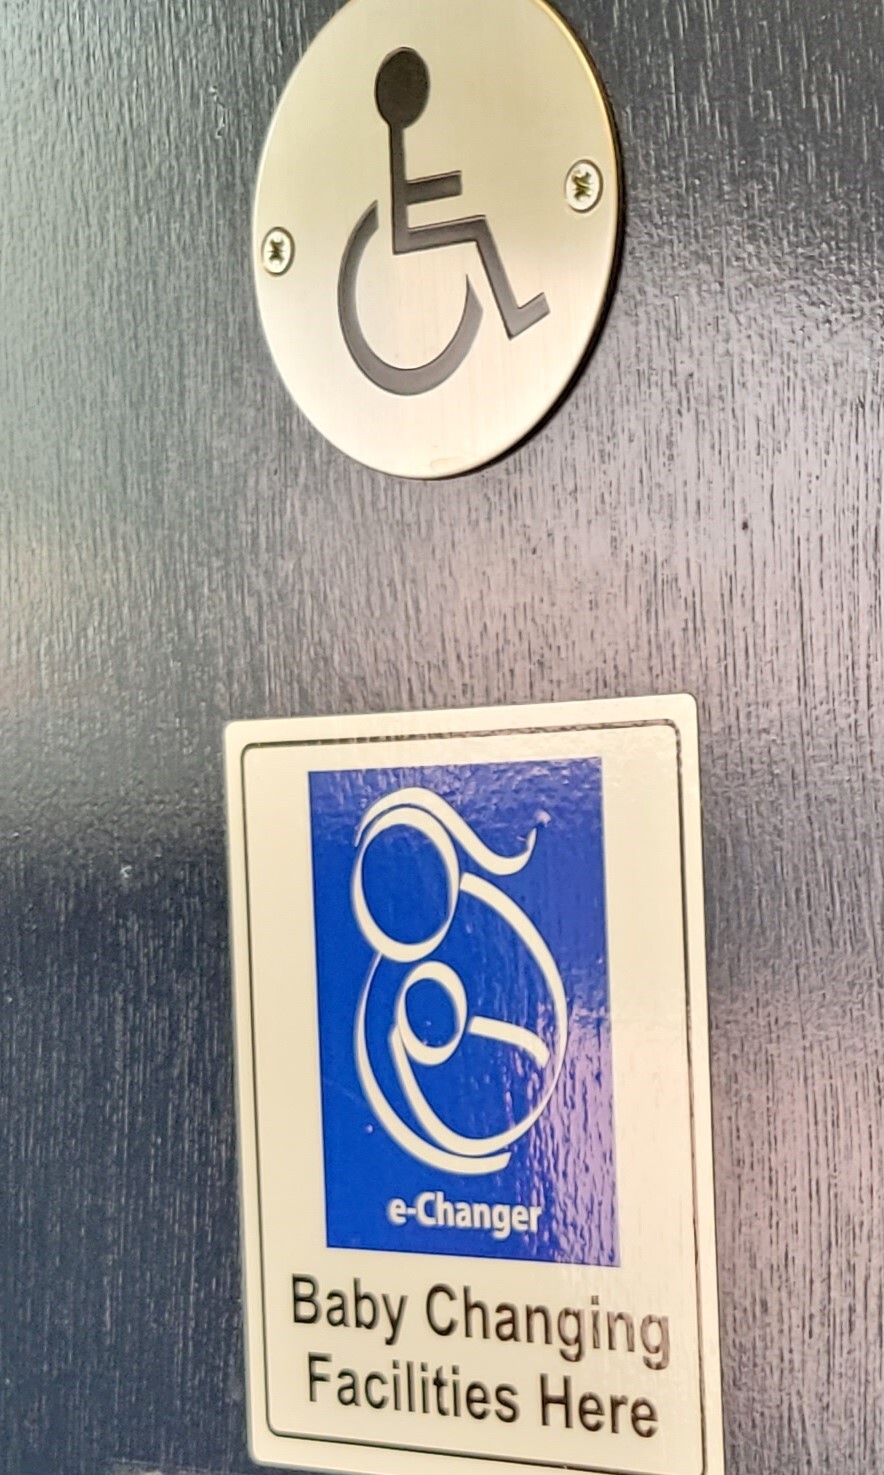 Disabled Toilet Door Sign at Angle